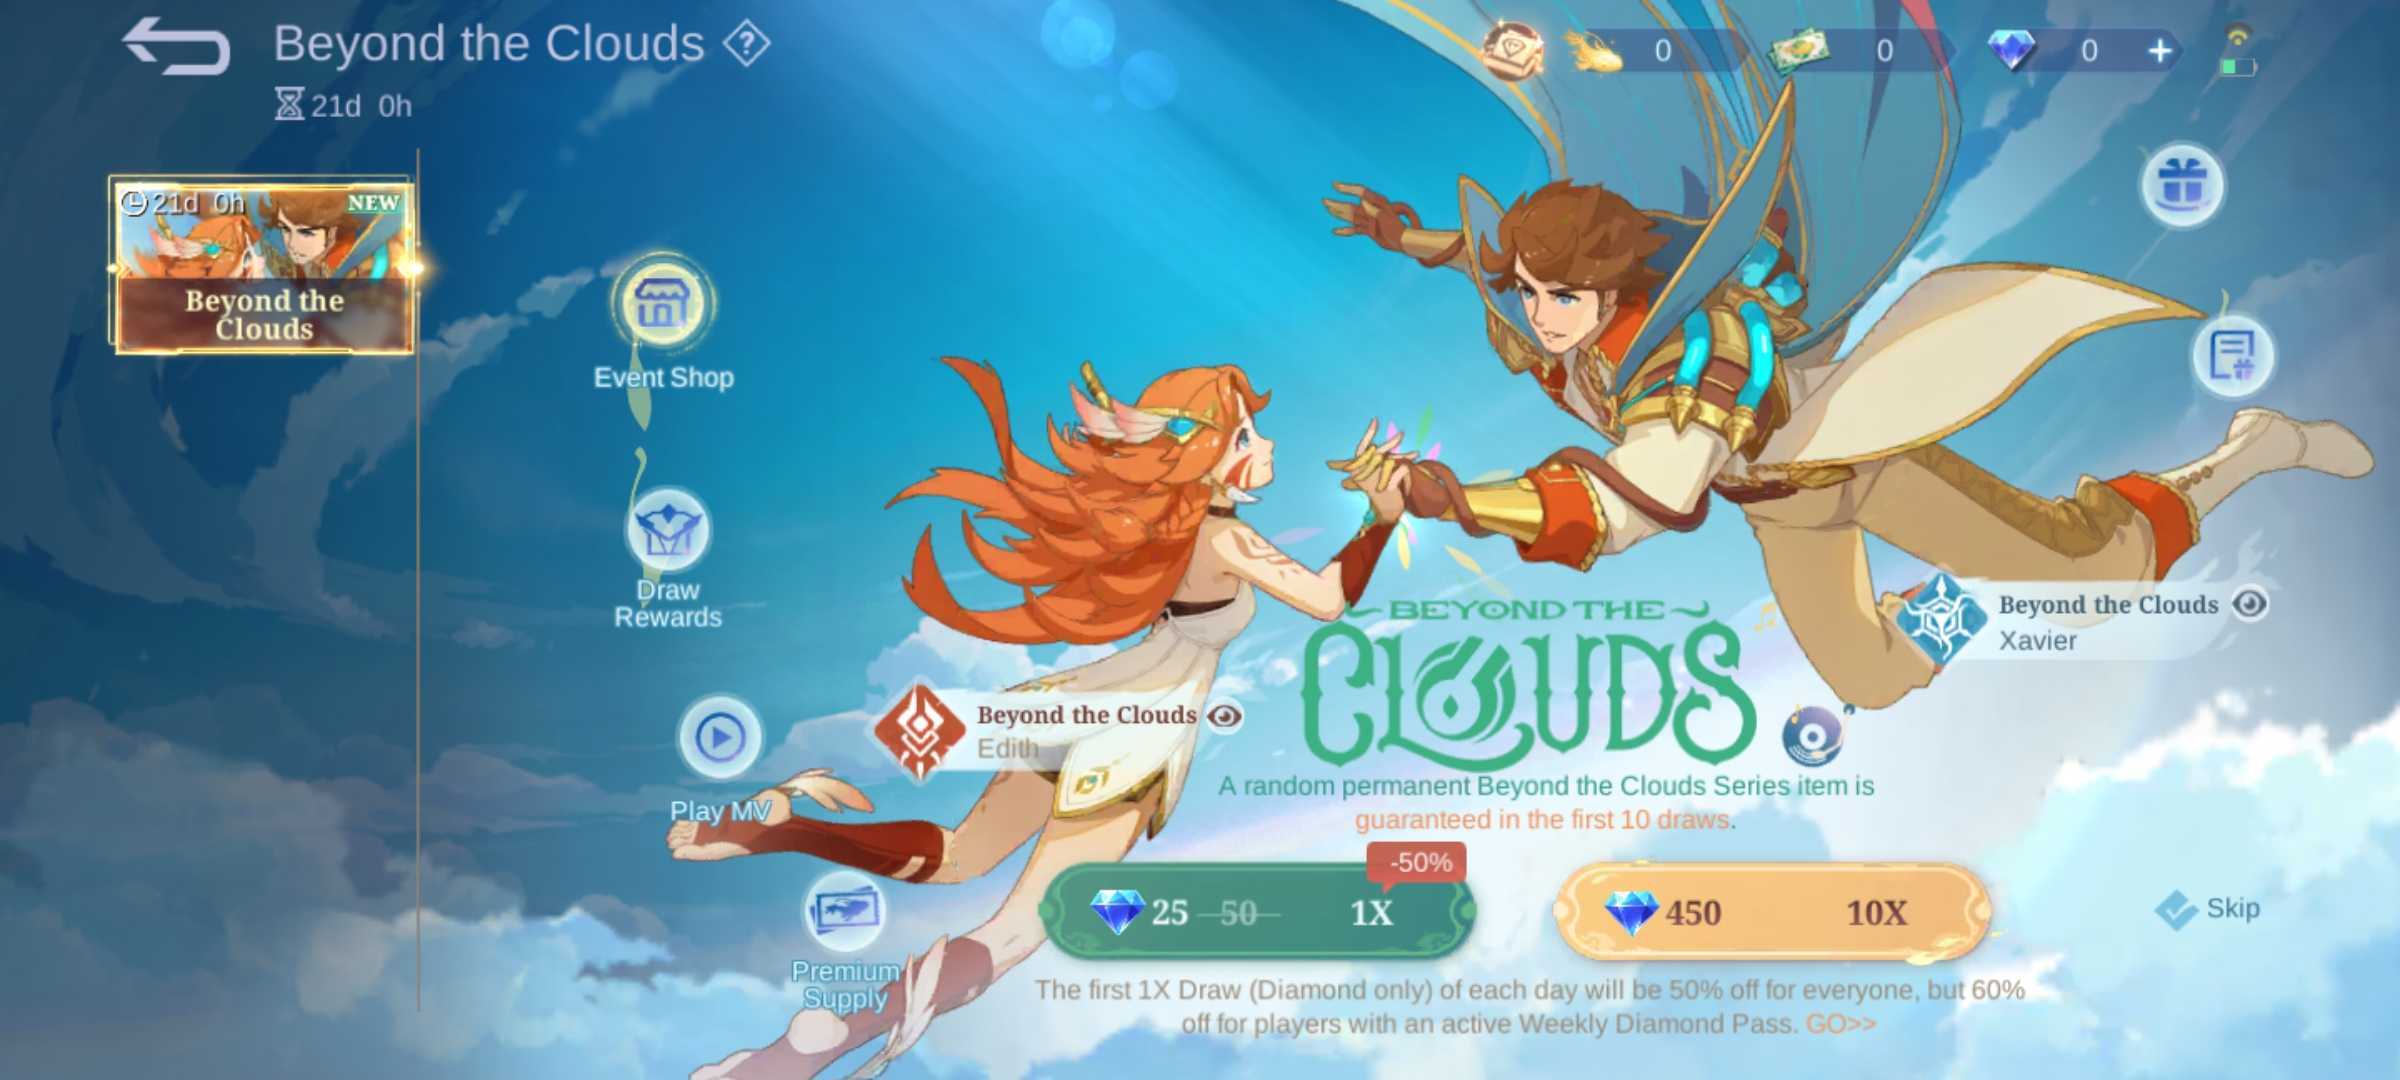 Beyond the Clouds Event Tab